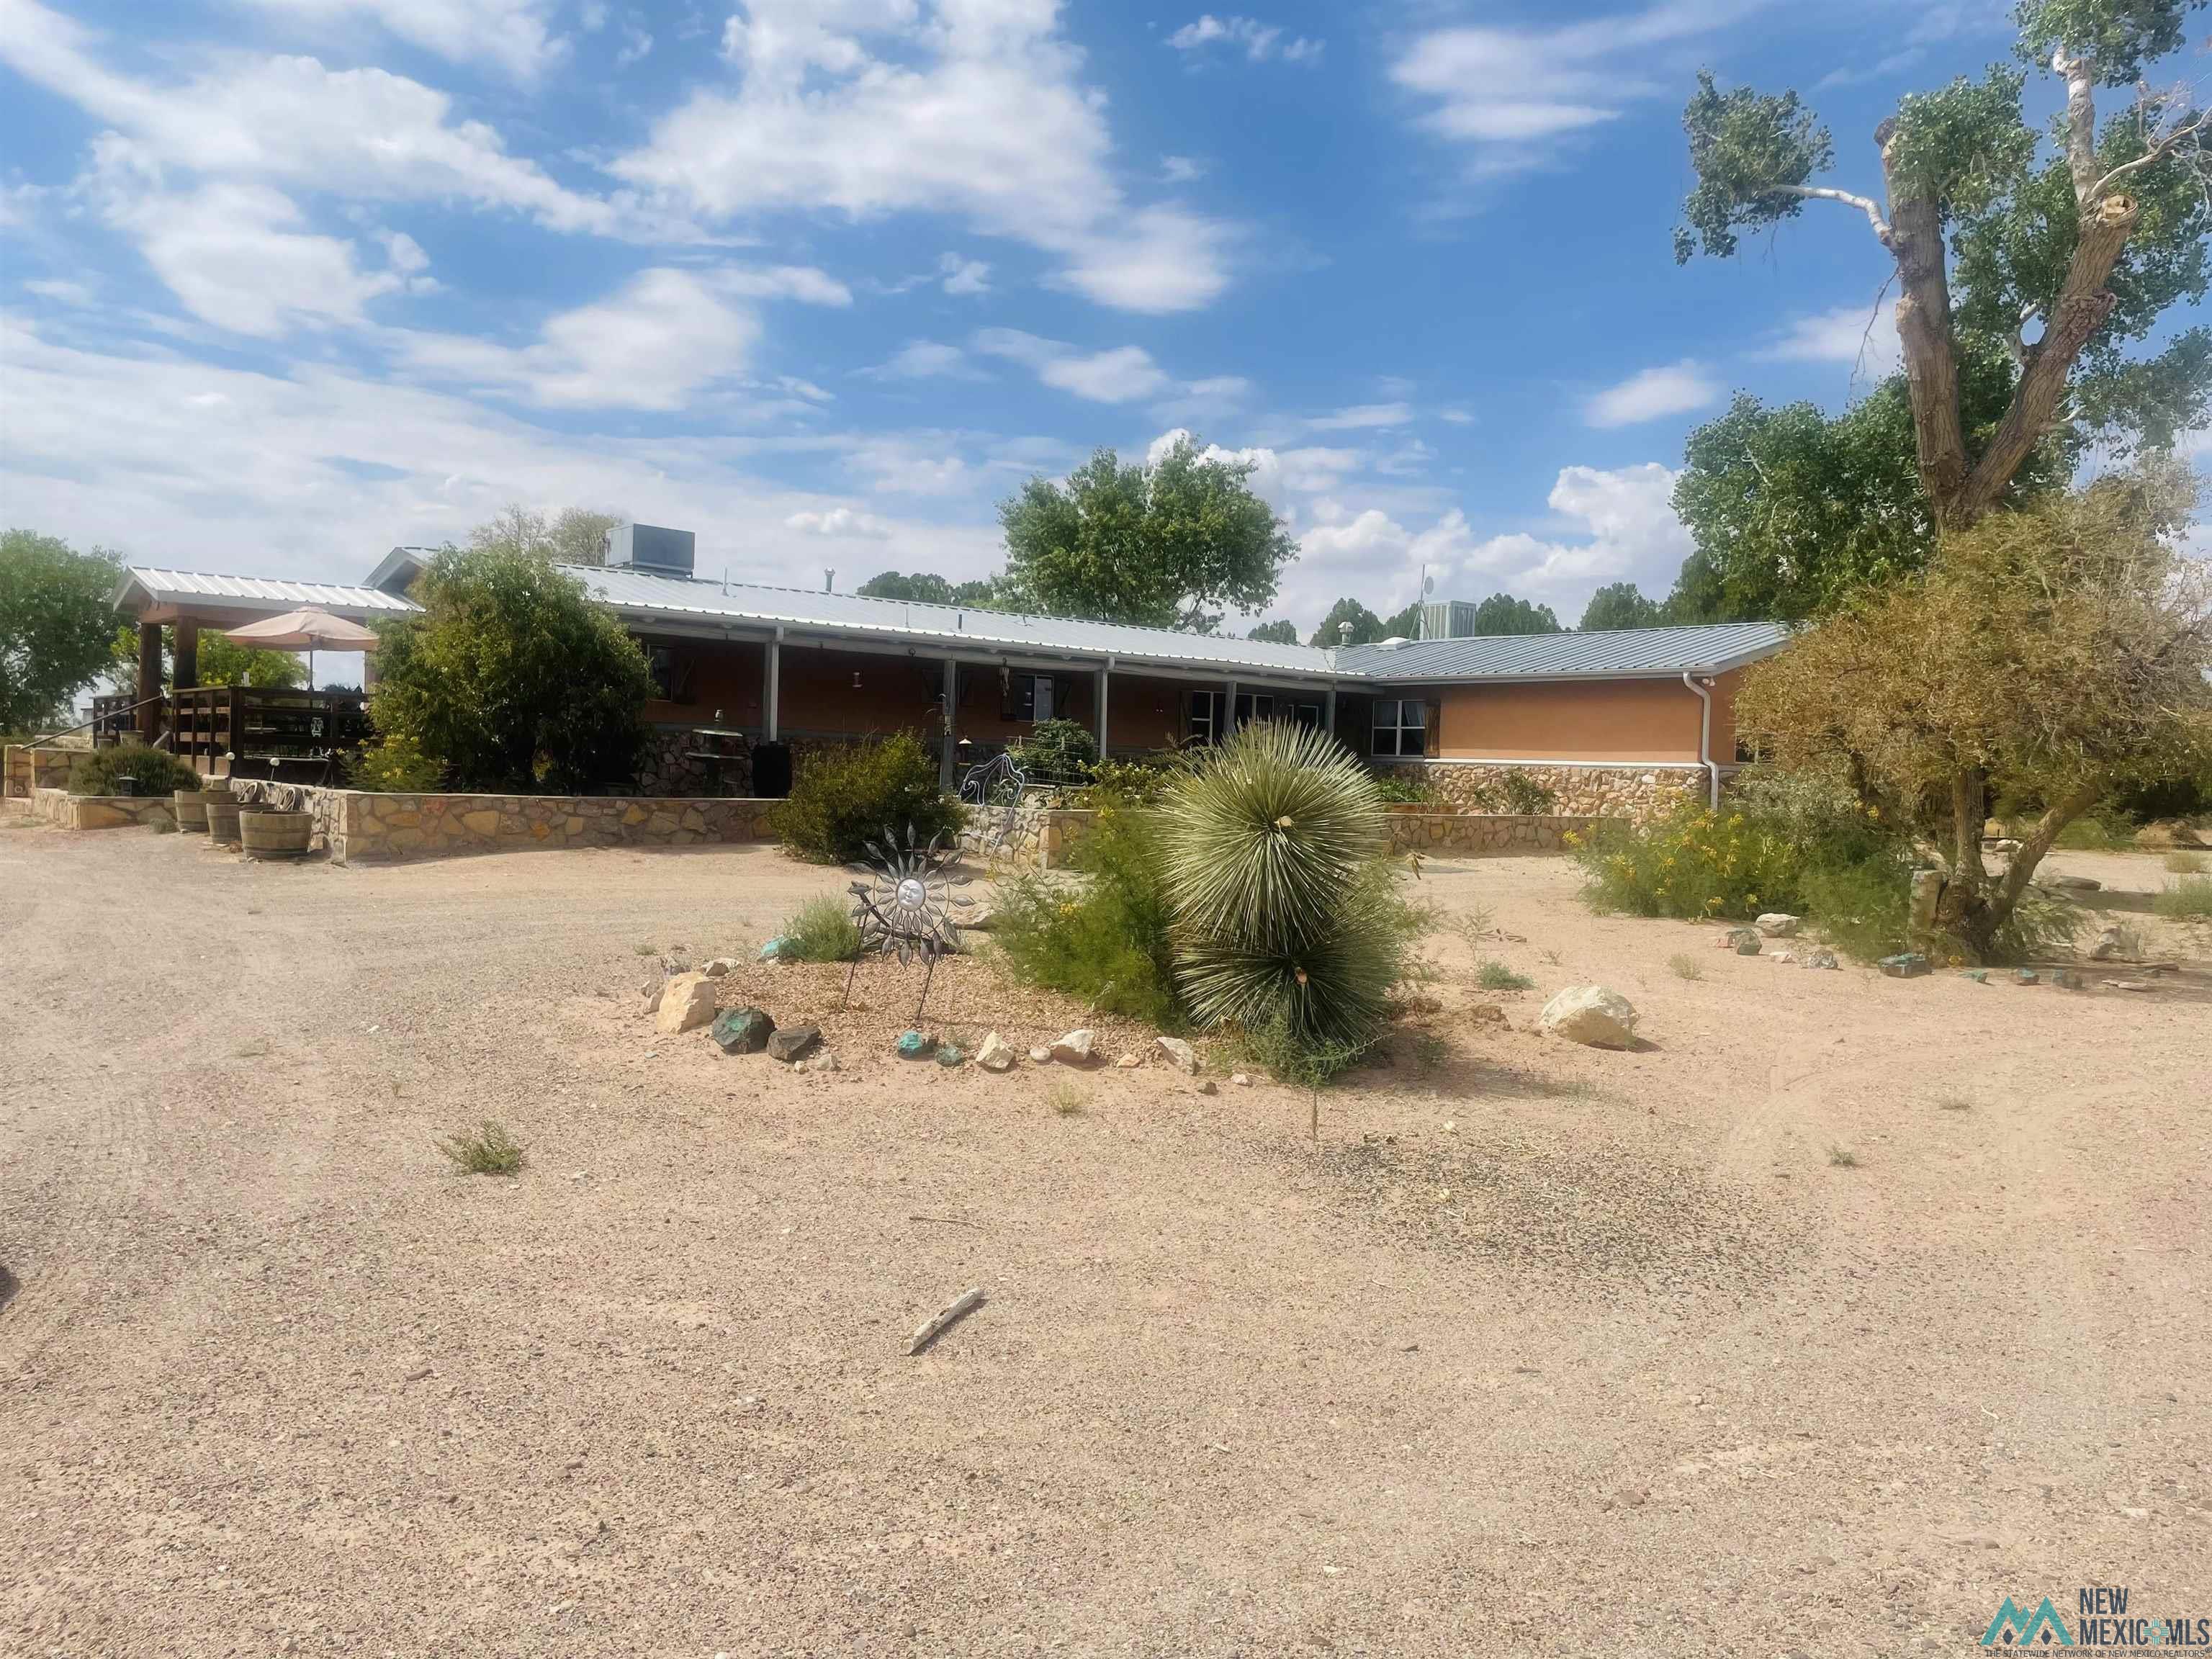 2525SW HWY 418 Deming, NM Photo